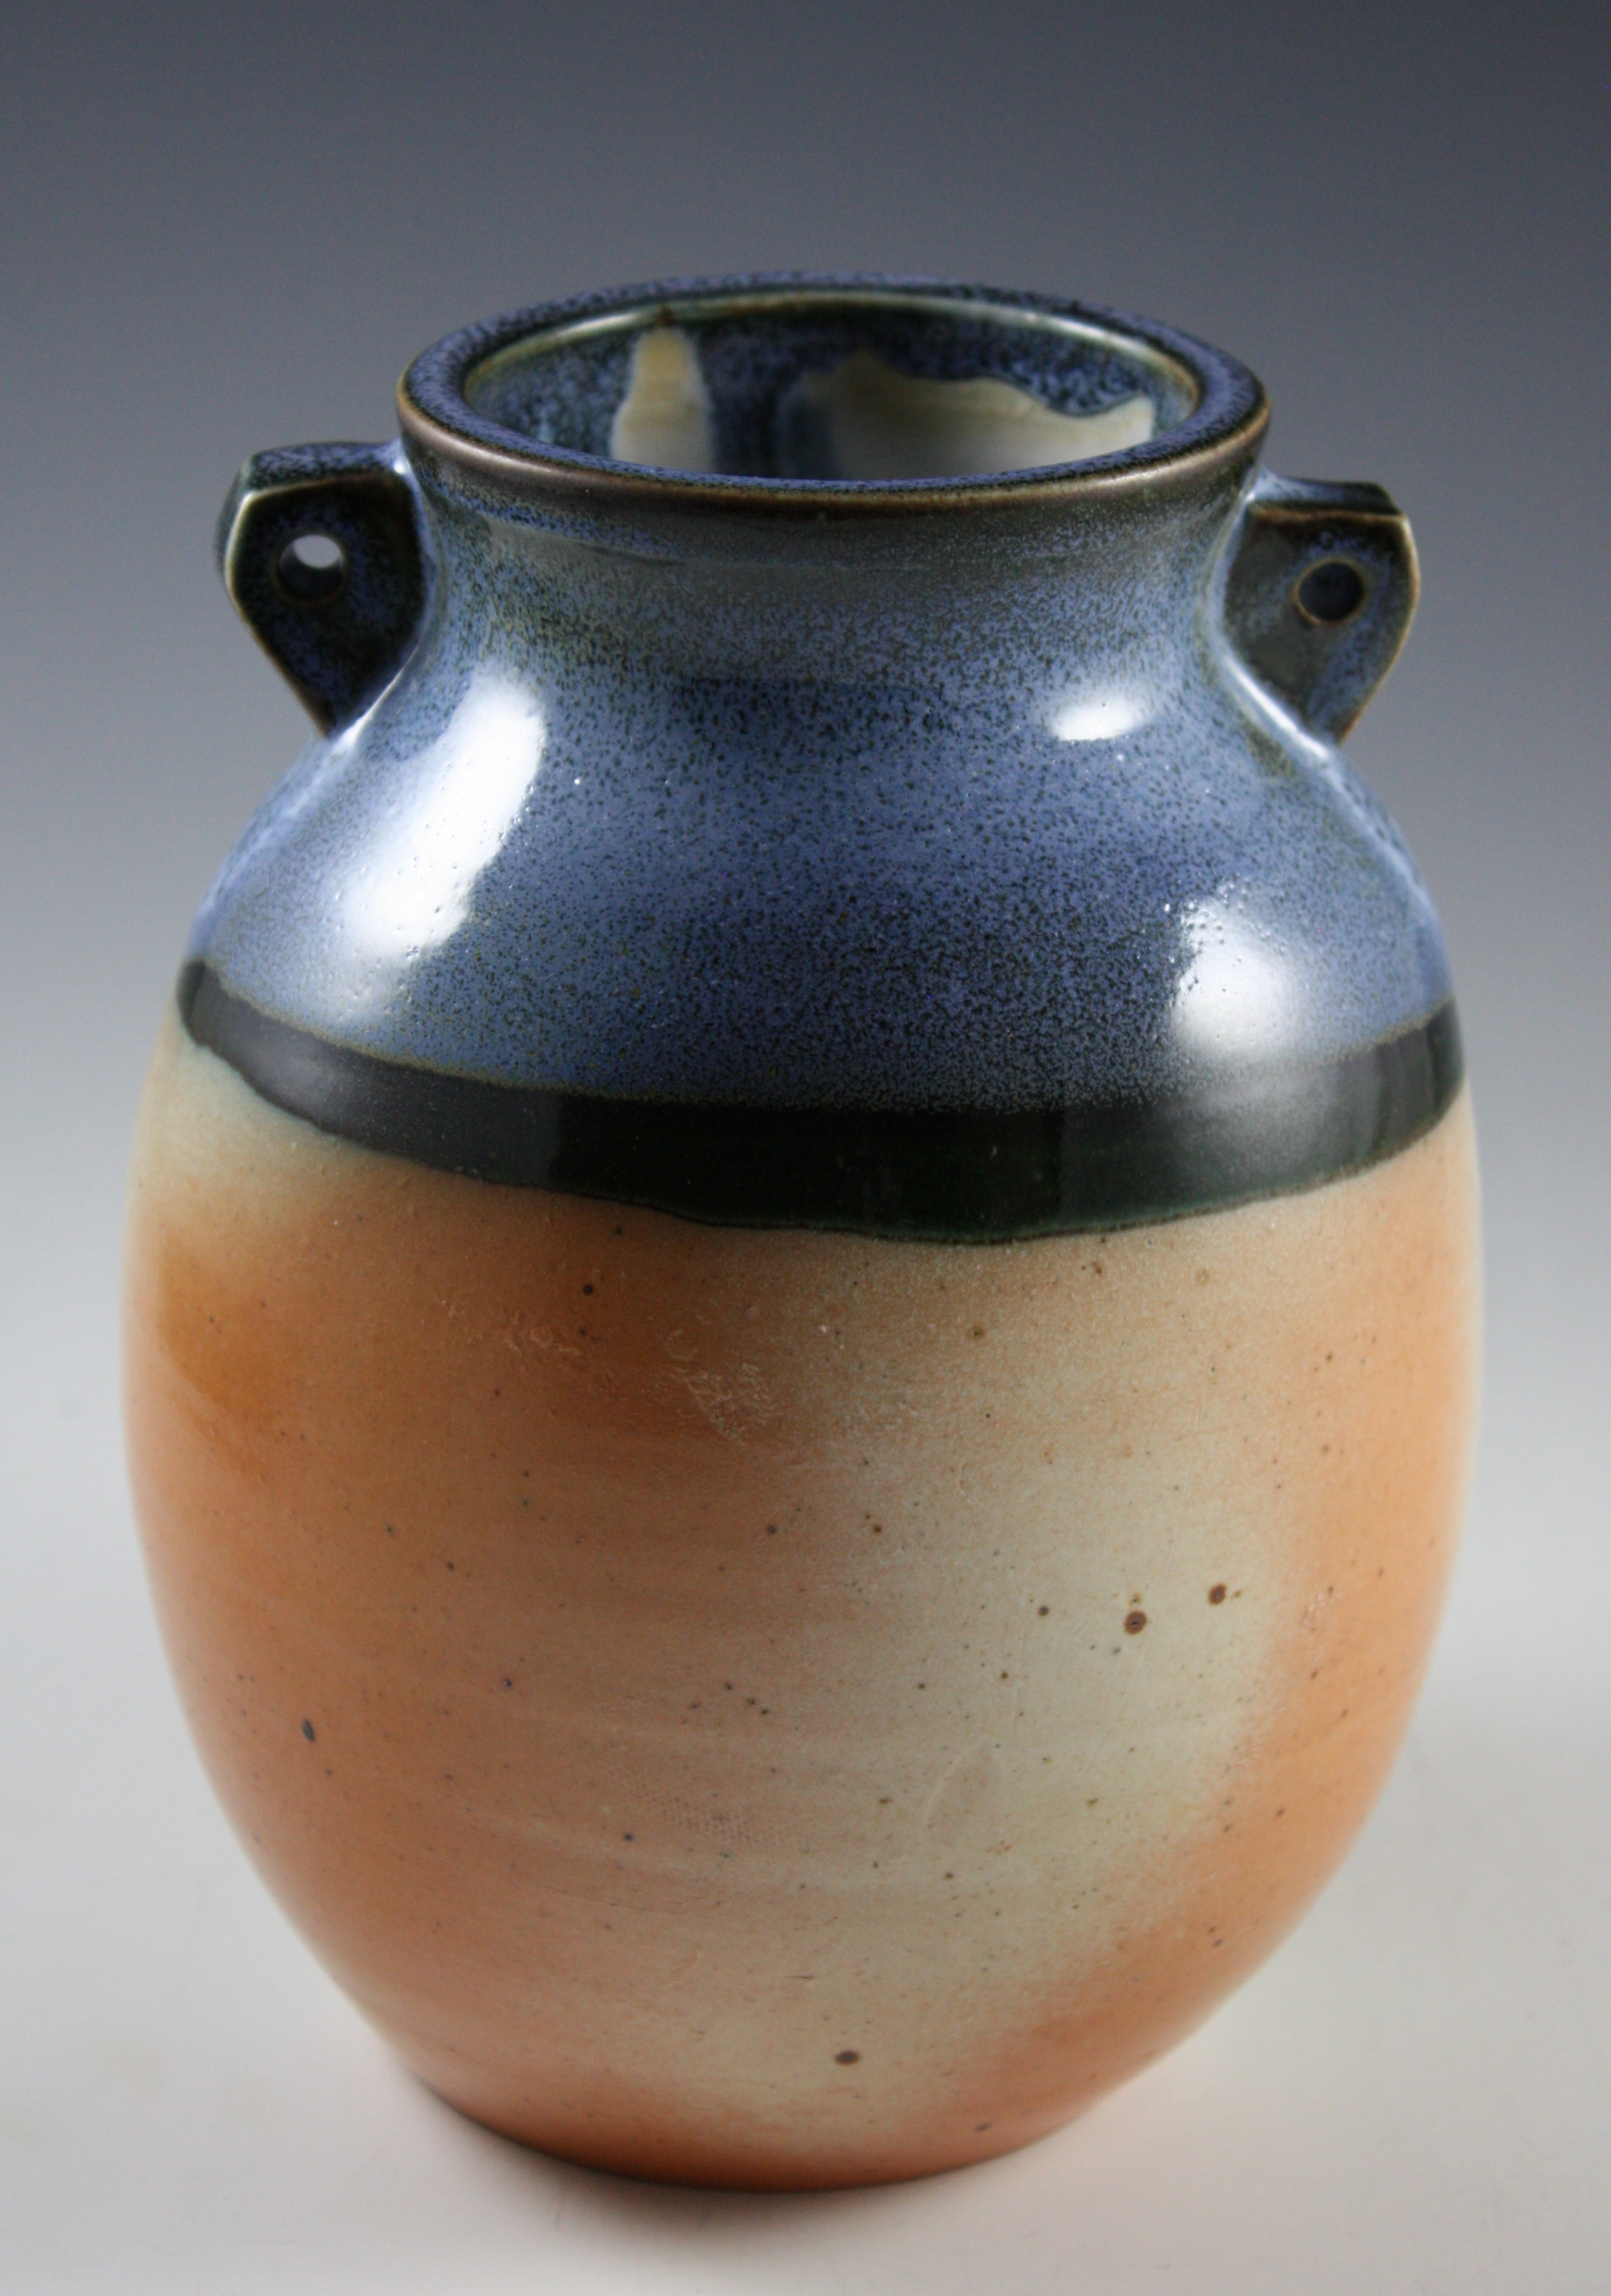 Big-bellied Vase with Archtectural Handles